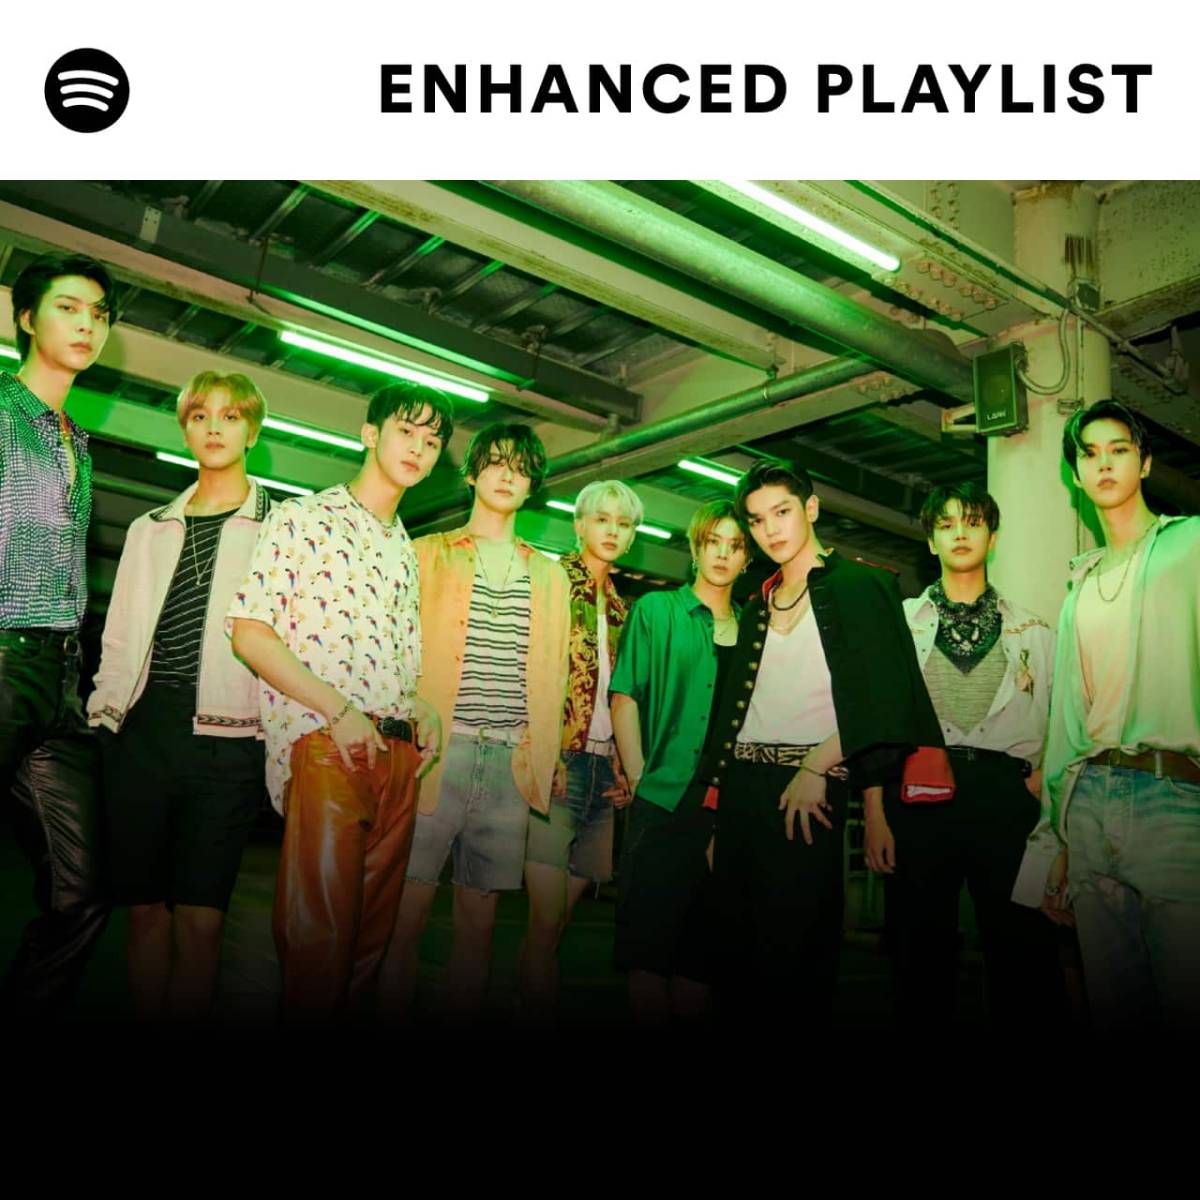  the Enhanced Playlist NCT 127 di Spotify